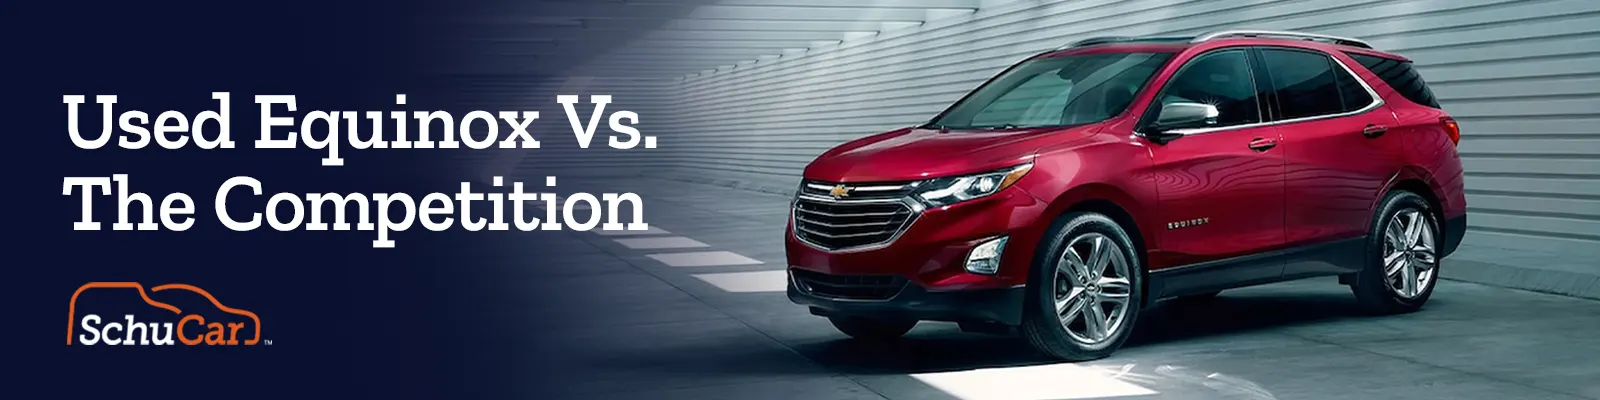 Used Chevrolet Equinox vs. the Competition | SchuCar